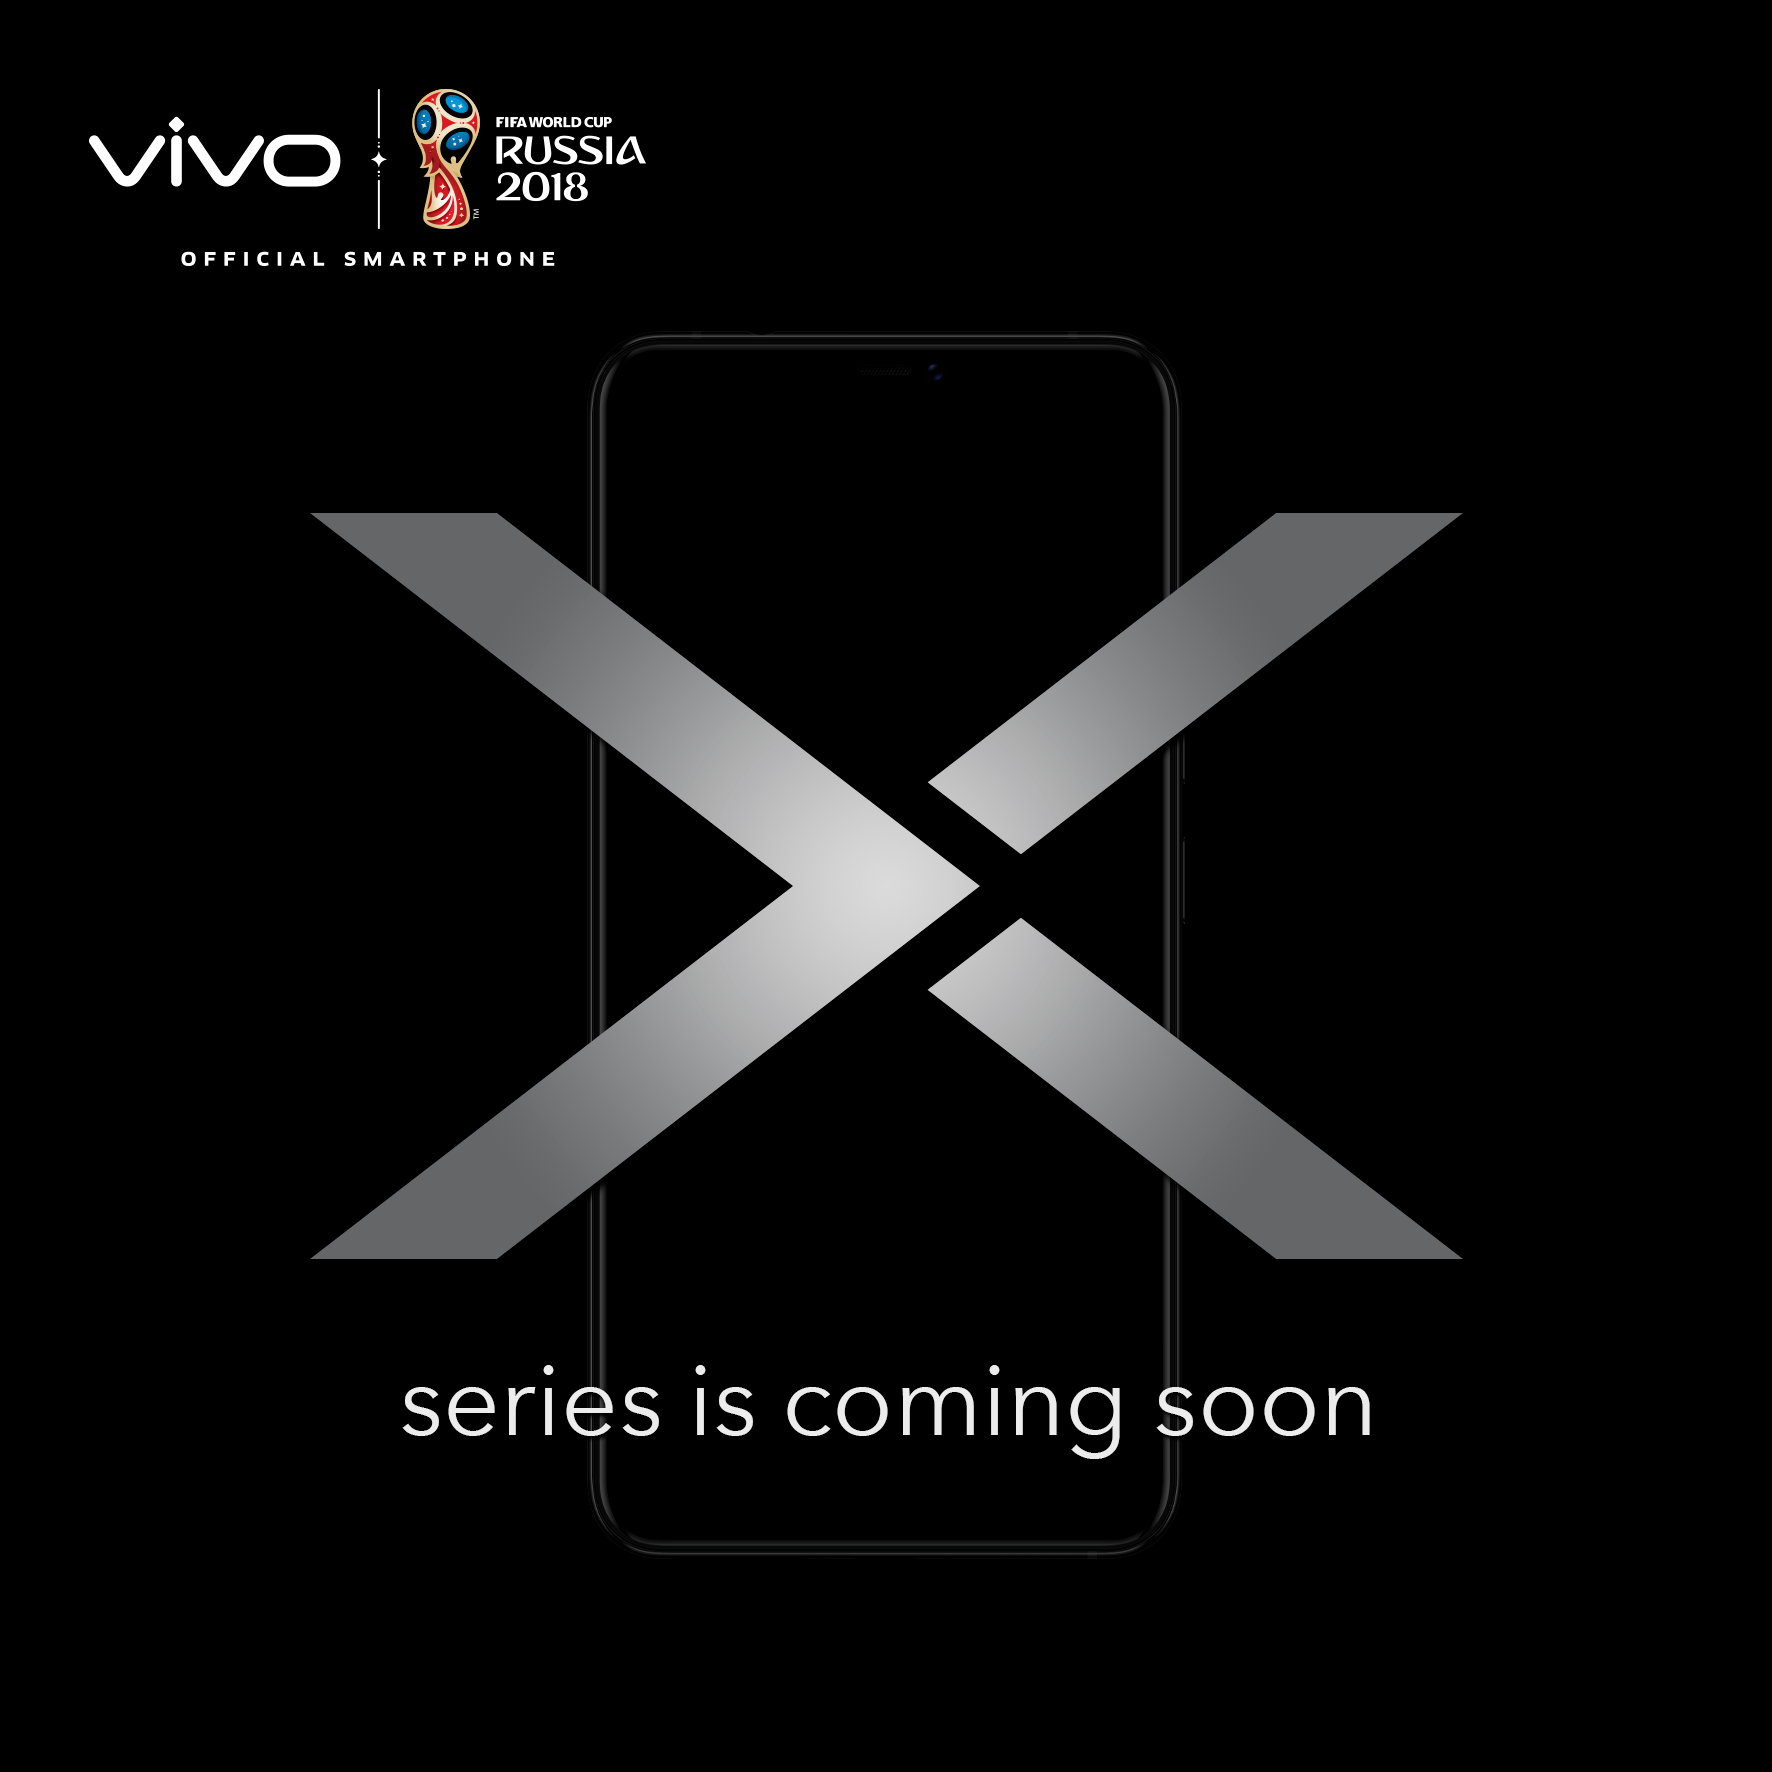 vivo Malaysia is bringing back the X series to Malaysia, is it the Xplay 7,  X20 or X21 UD?